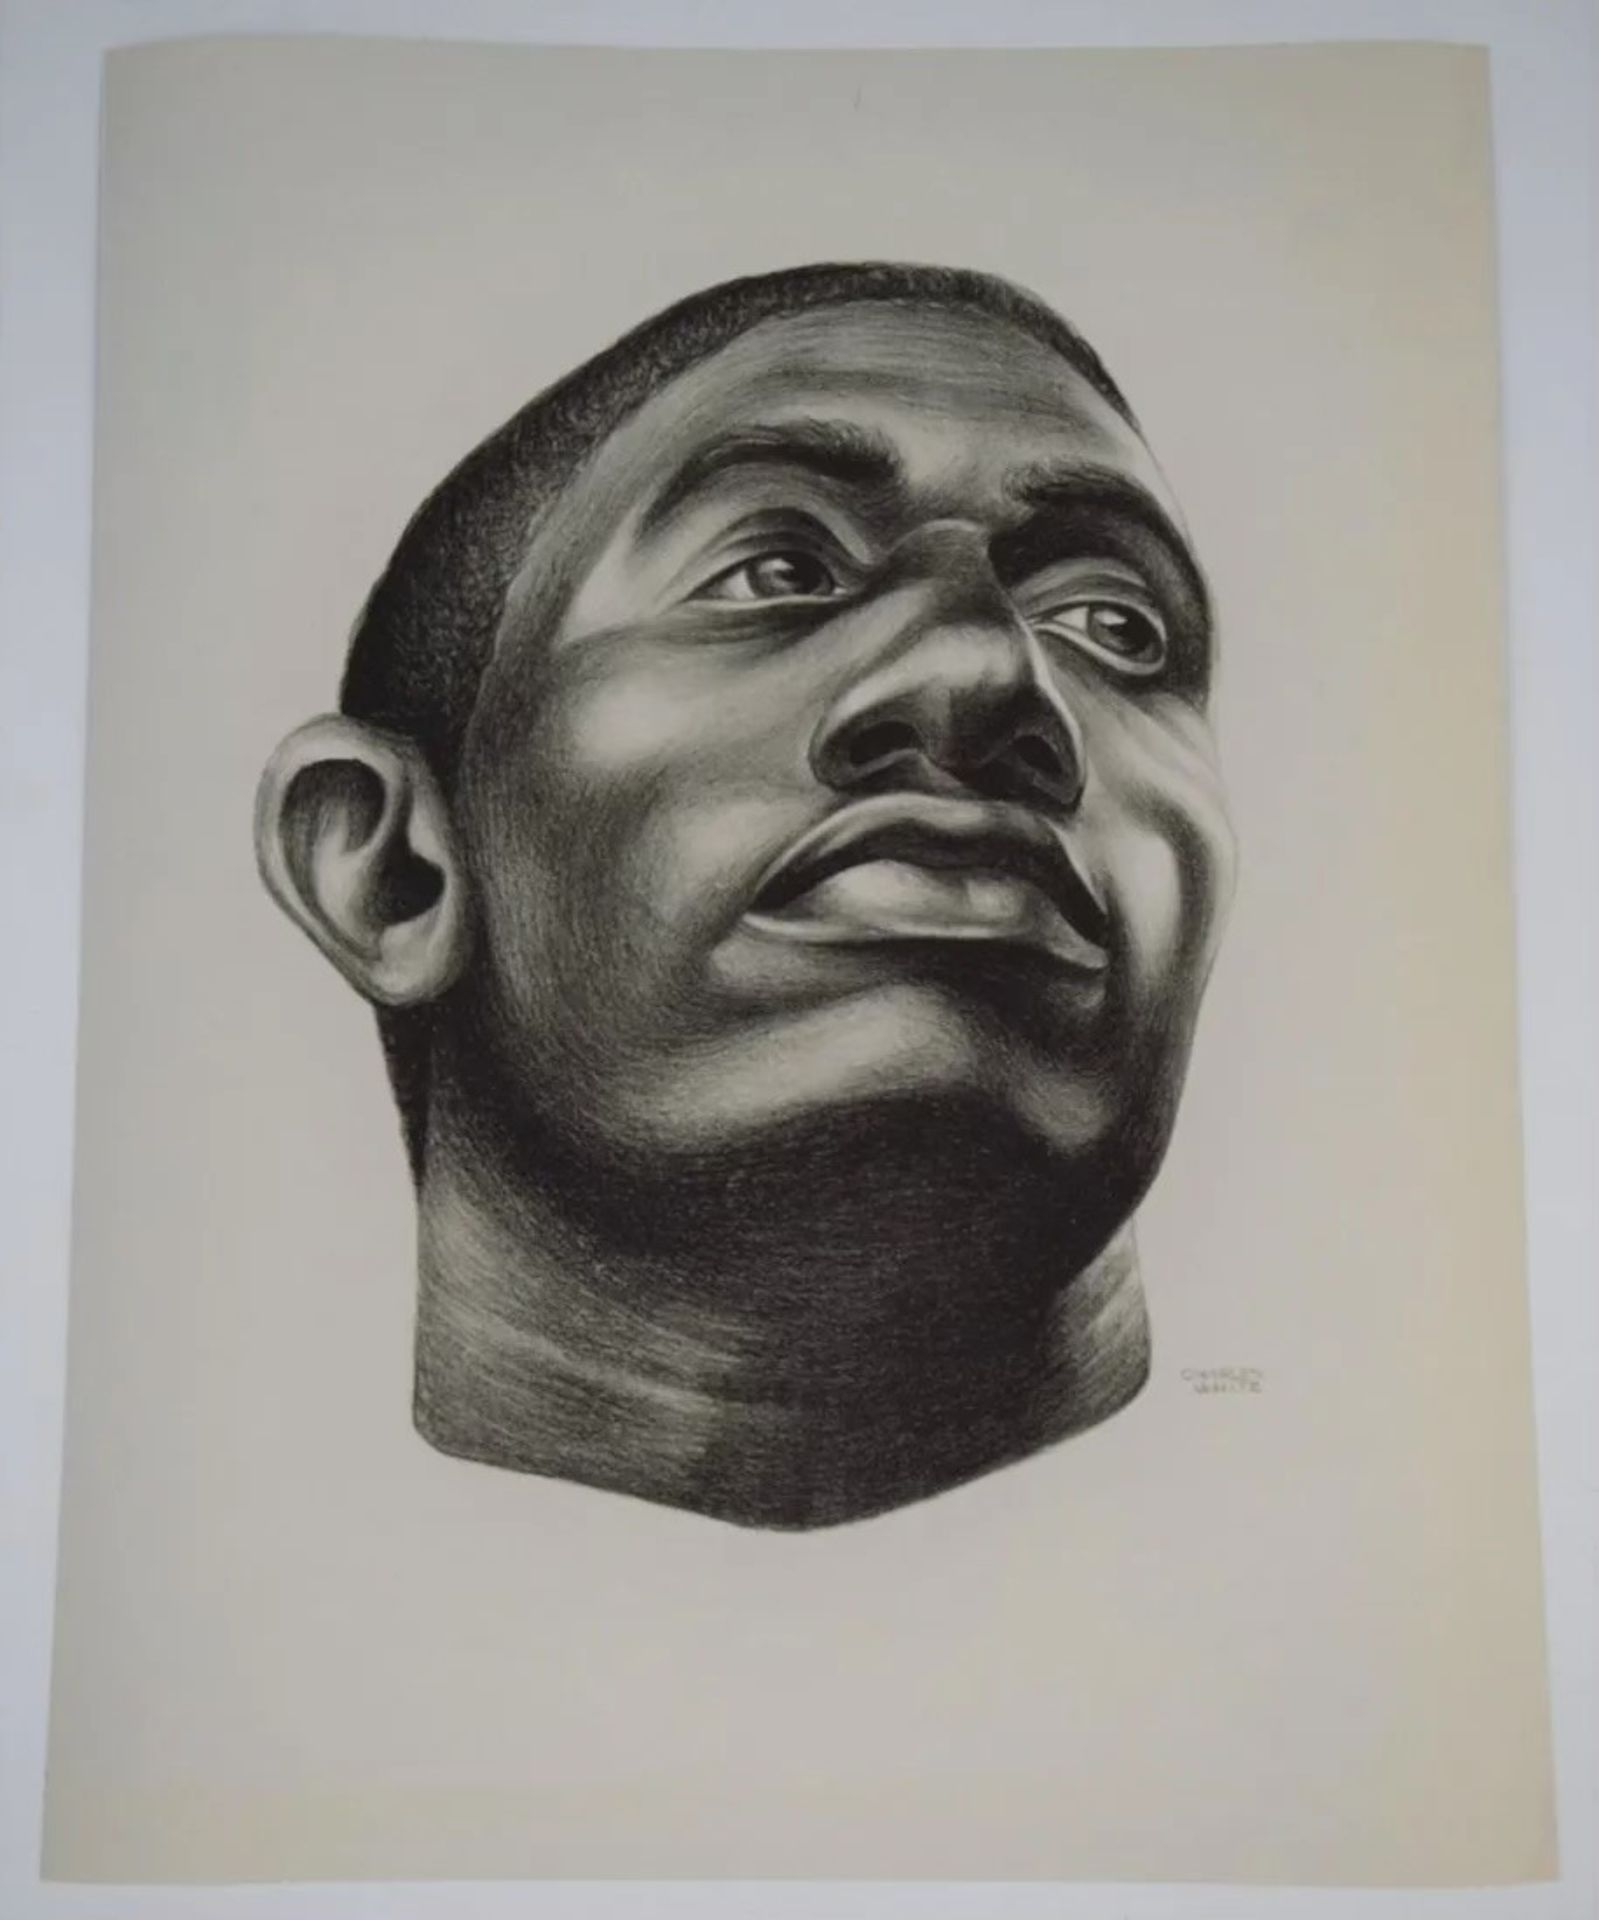 After Charles White, Gideon (Print)